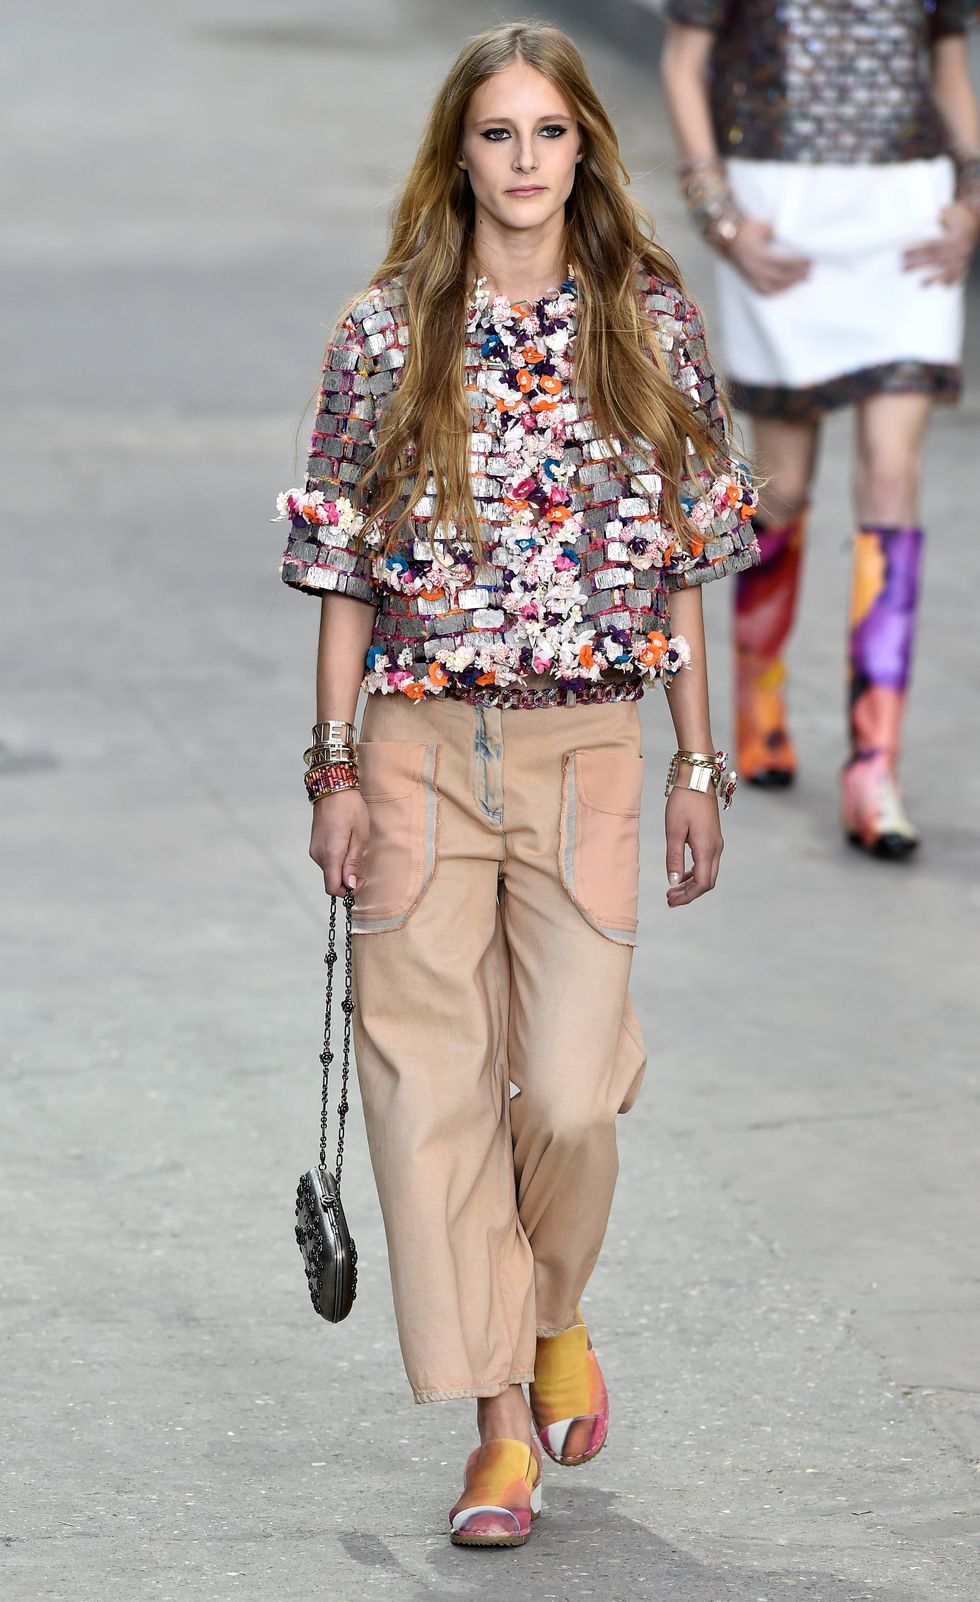 In pictures: Chanel Spring 2015 catwalk show